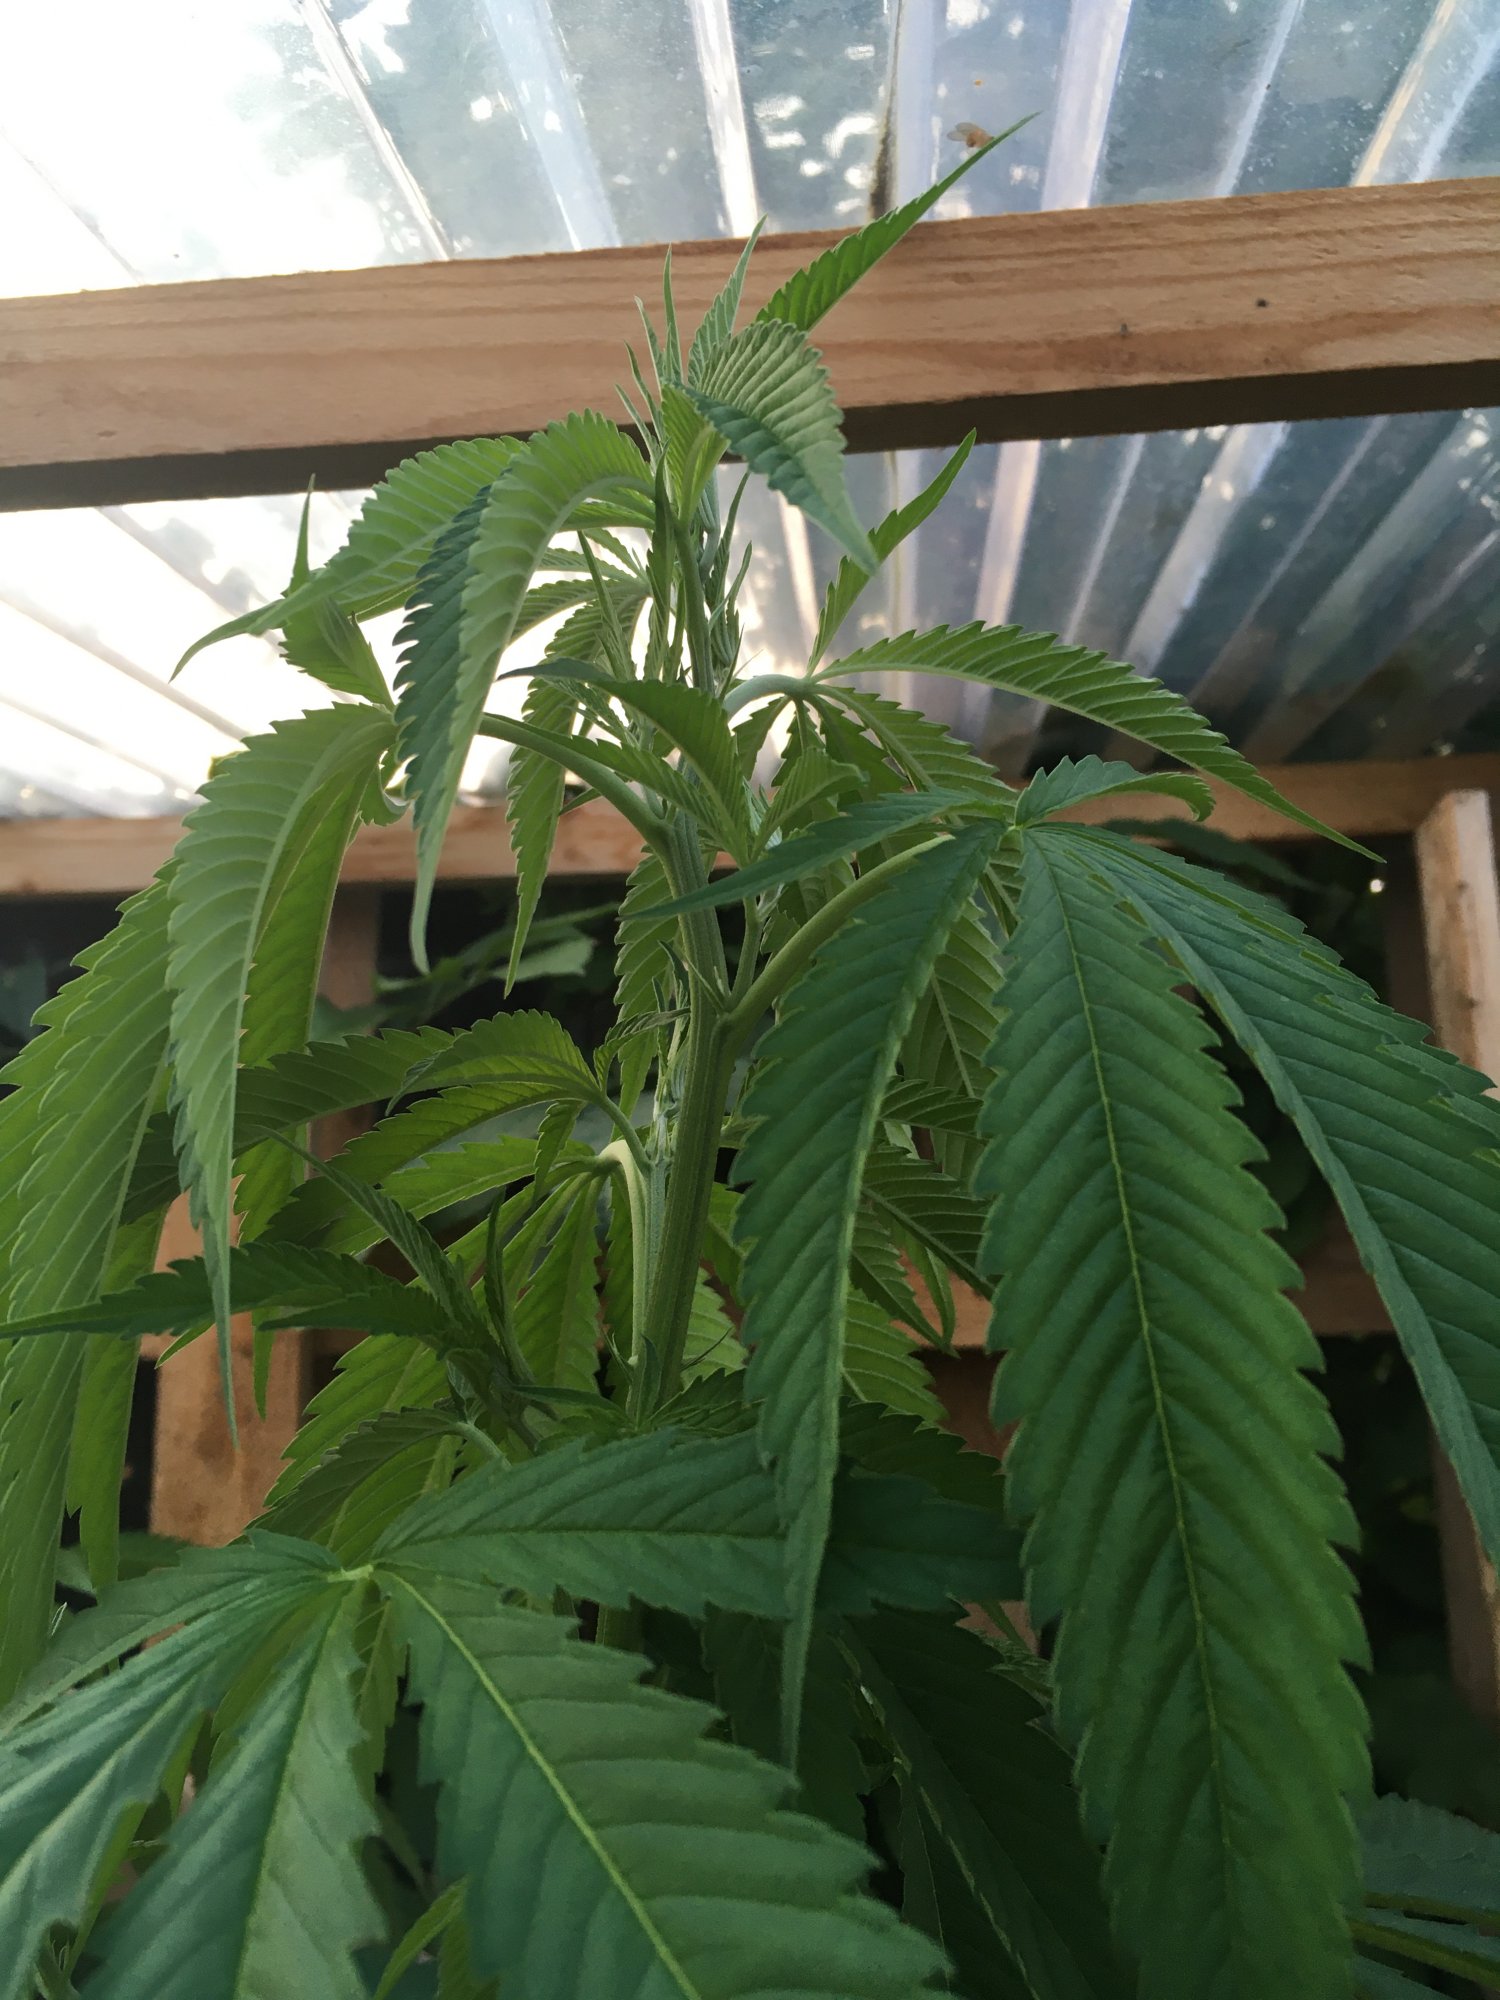 Chocolope growing too big for her home